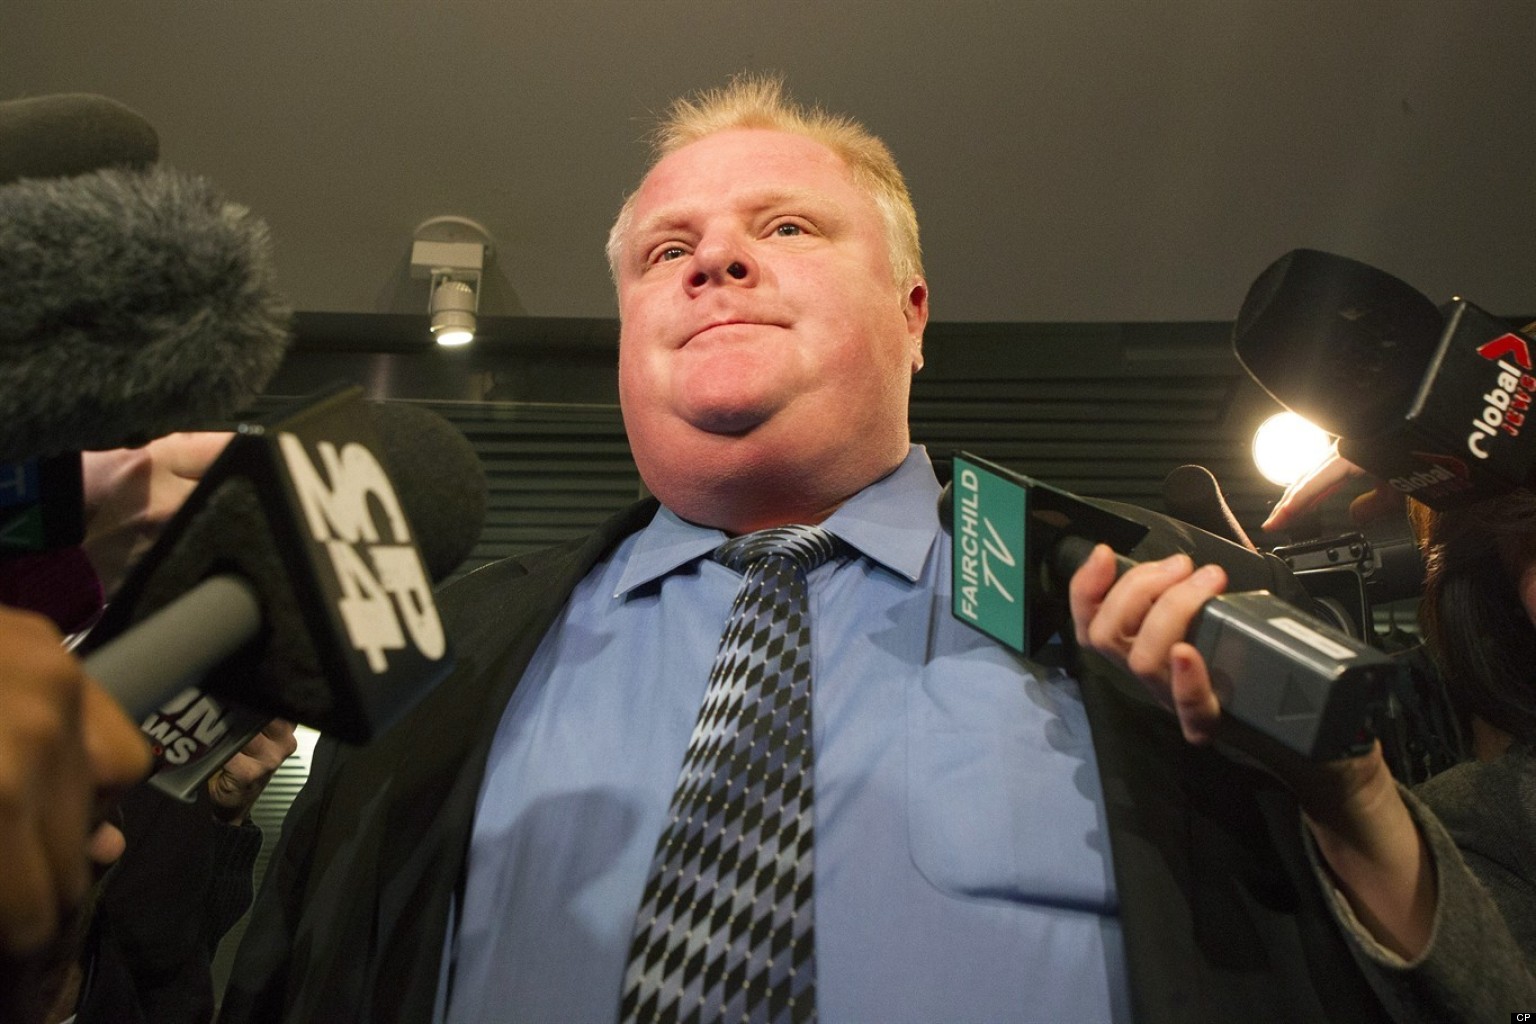 Rob ford appeal factum #2